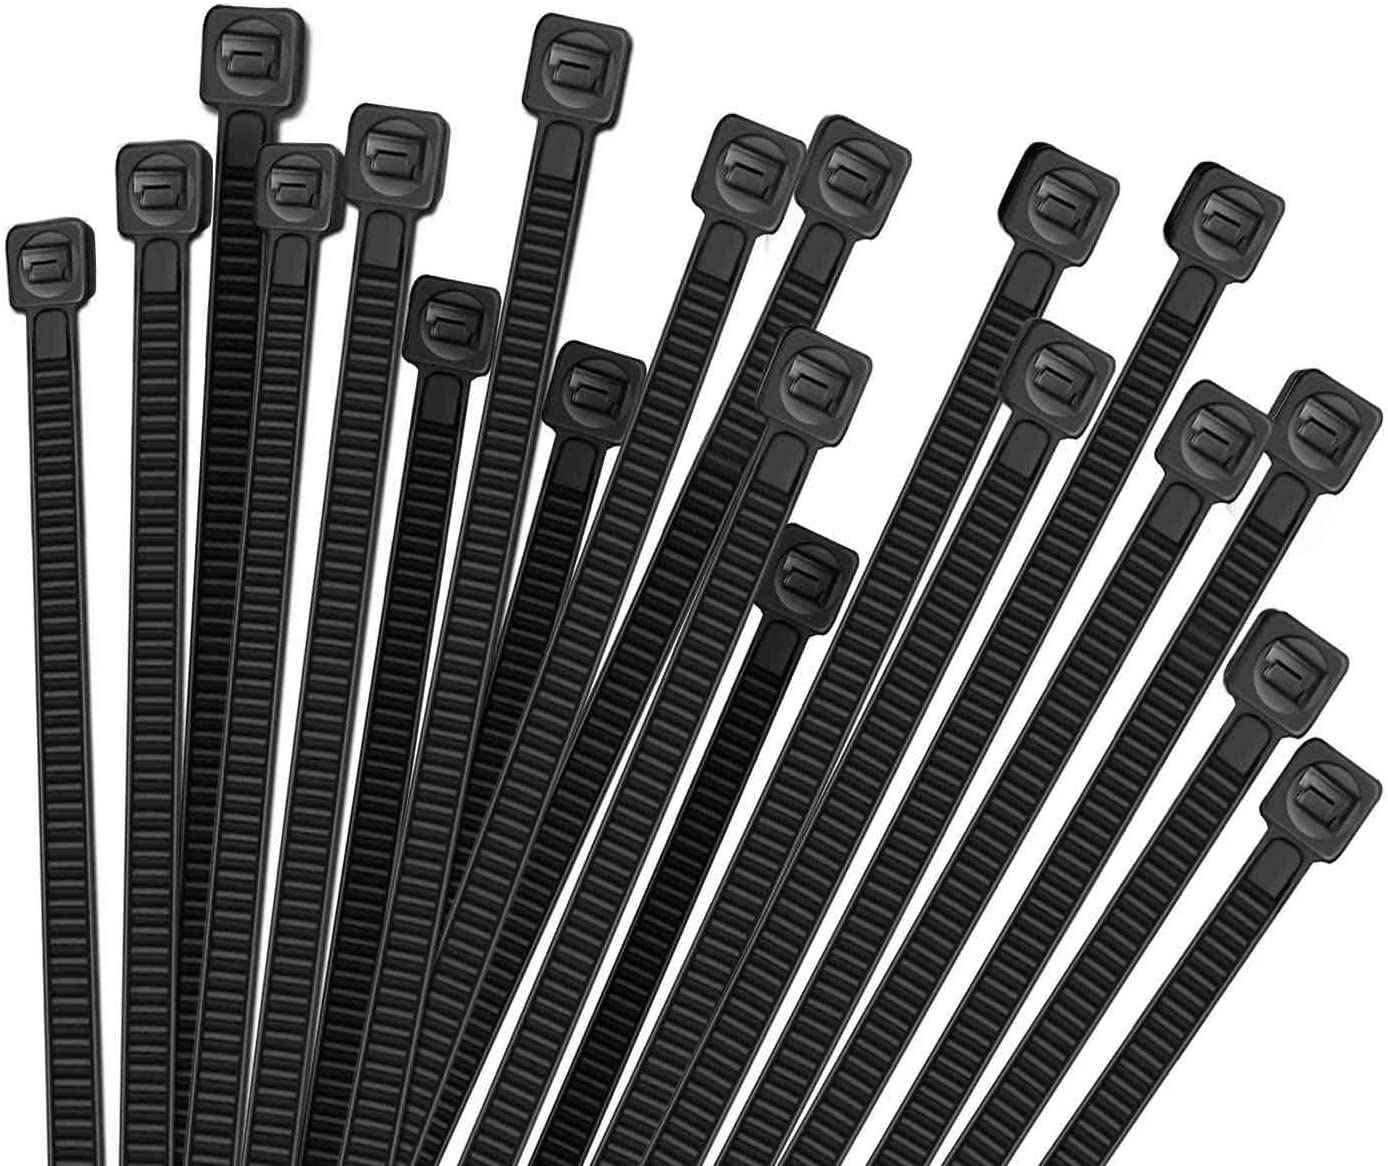 Kuber Industries 250 MM Self Locking Cable Ties|Heavy Duty Nylon Zip Ties|Wire With 49 Pounds Tensile Strength|Pack of 100 (Black)